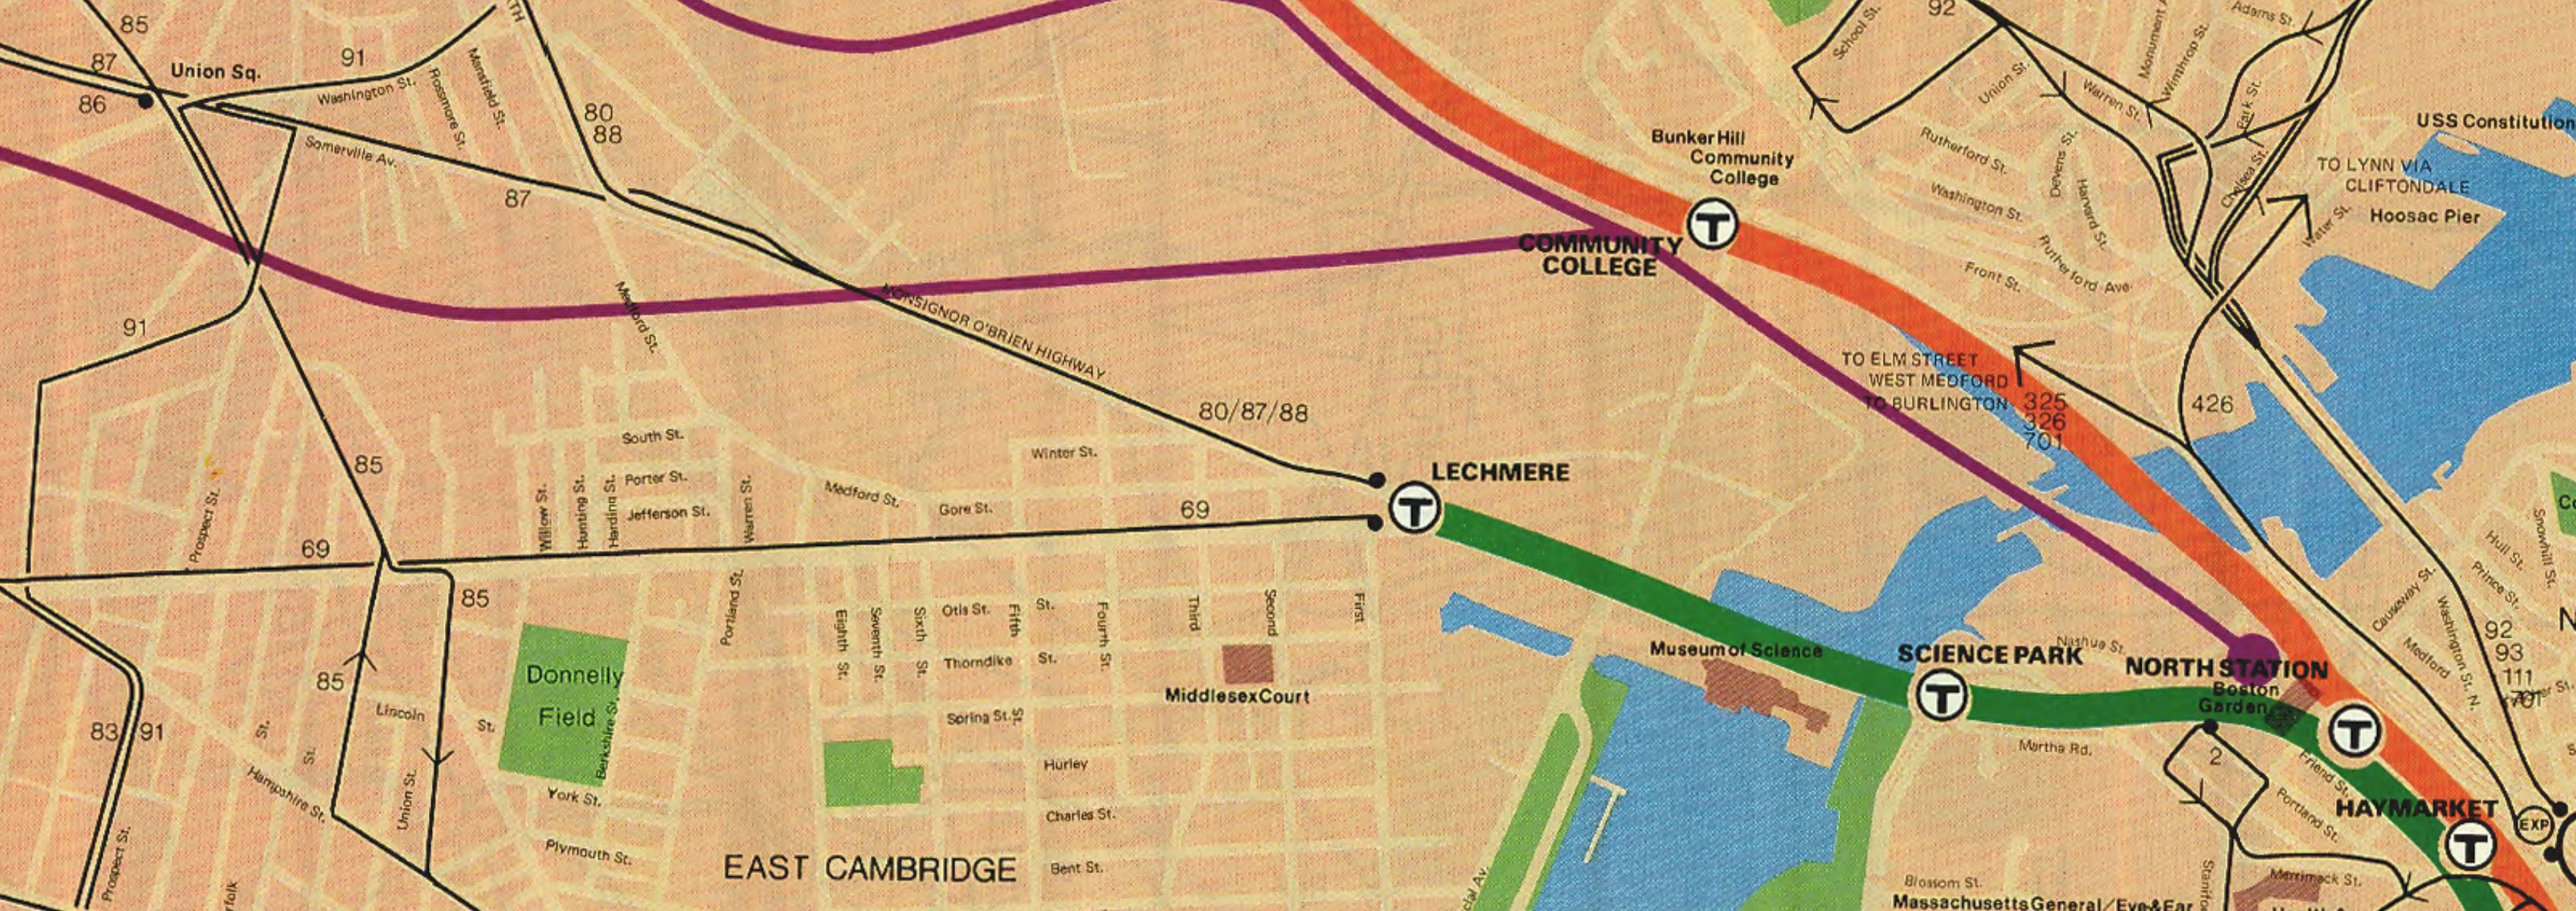 A detail of the North Station area from a 1977 MBTA map.